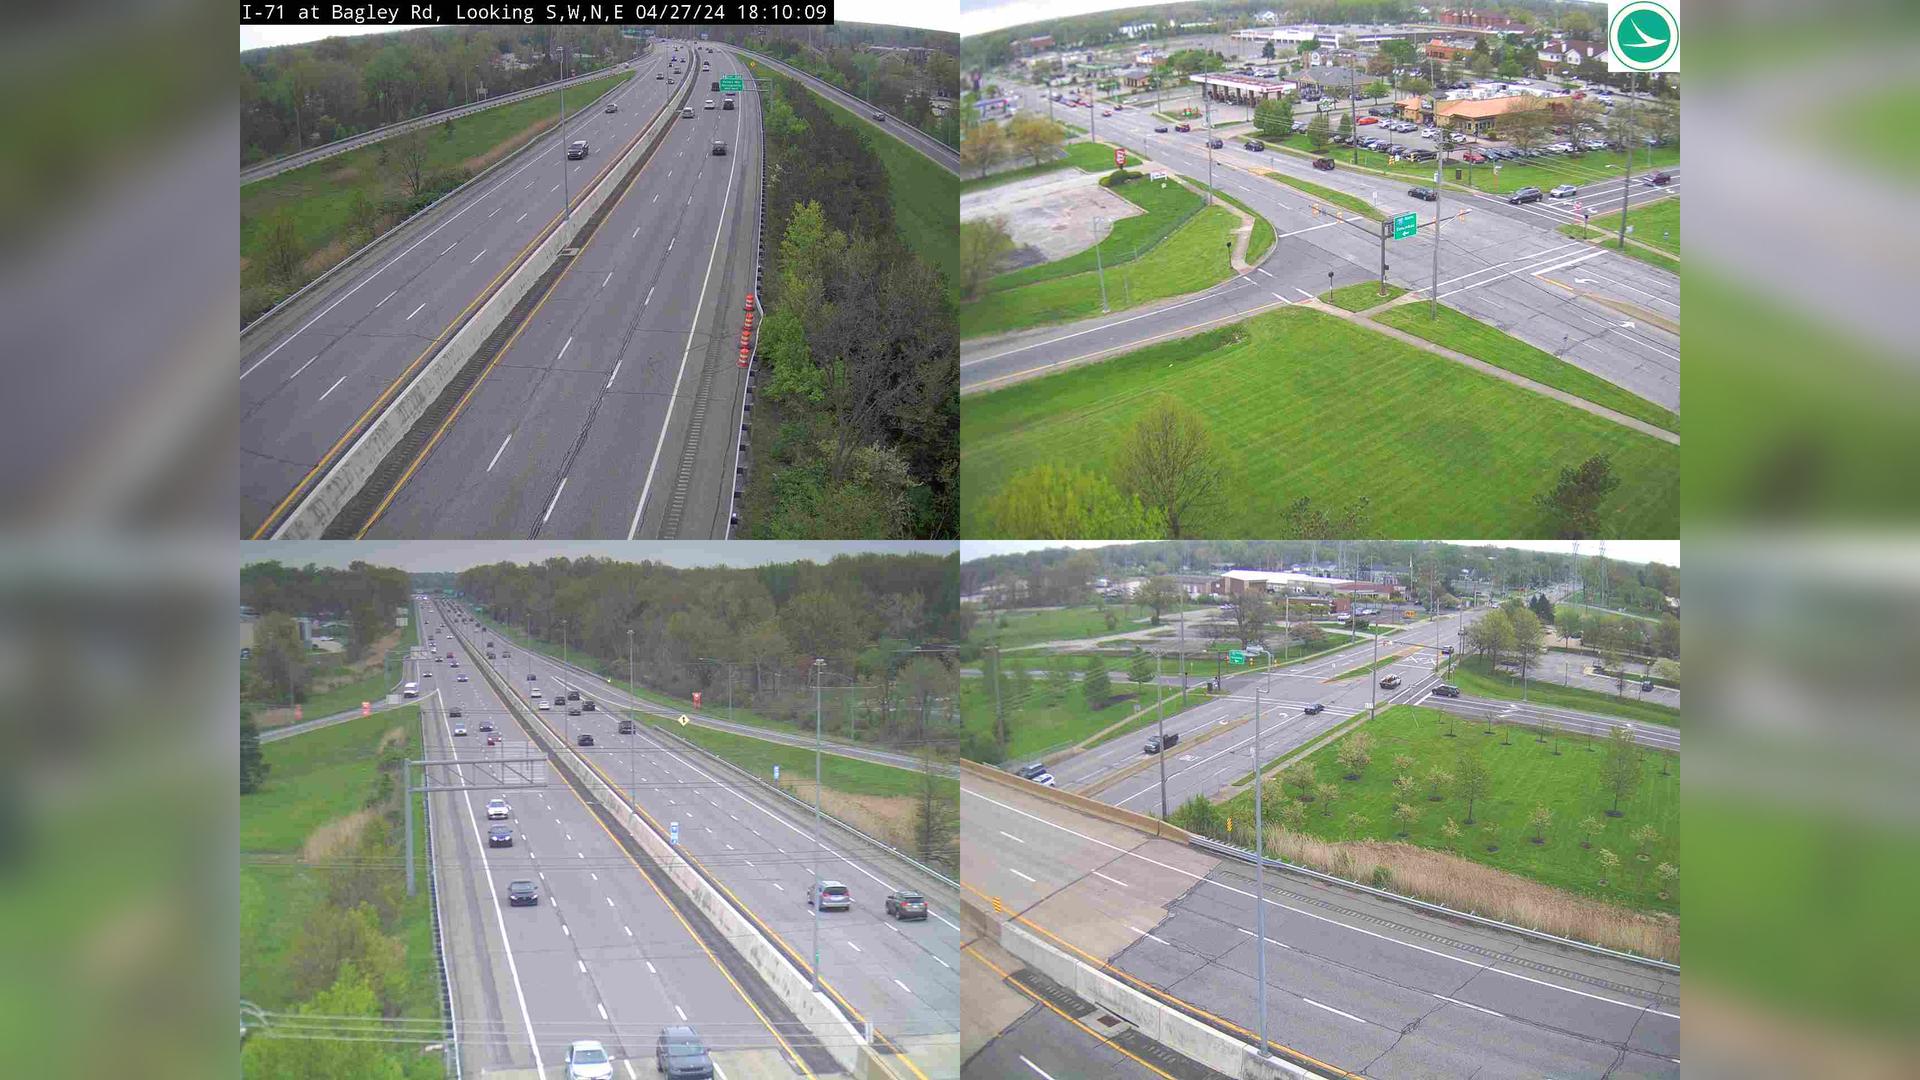 Traffic Cam Middleburg Heights: I-71 at Bagley Rd Player